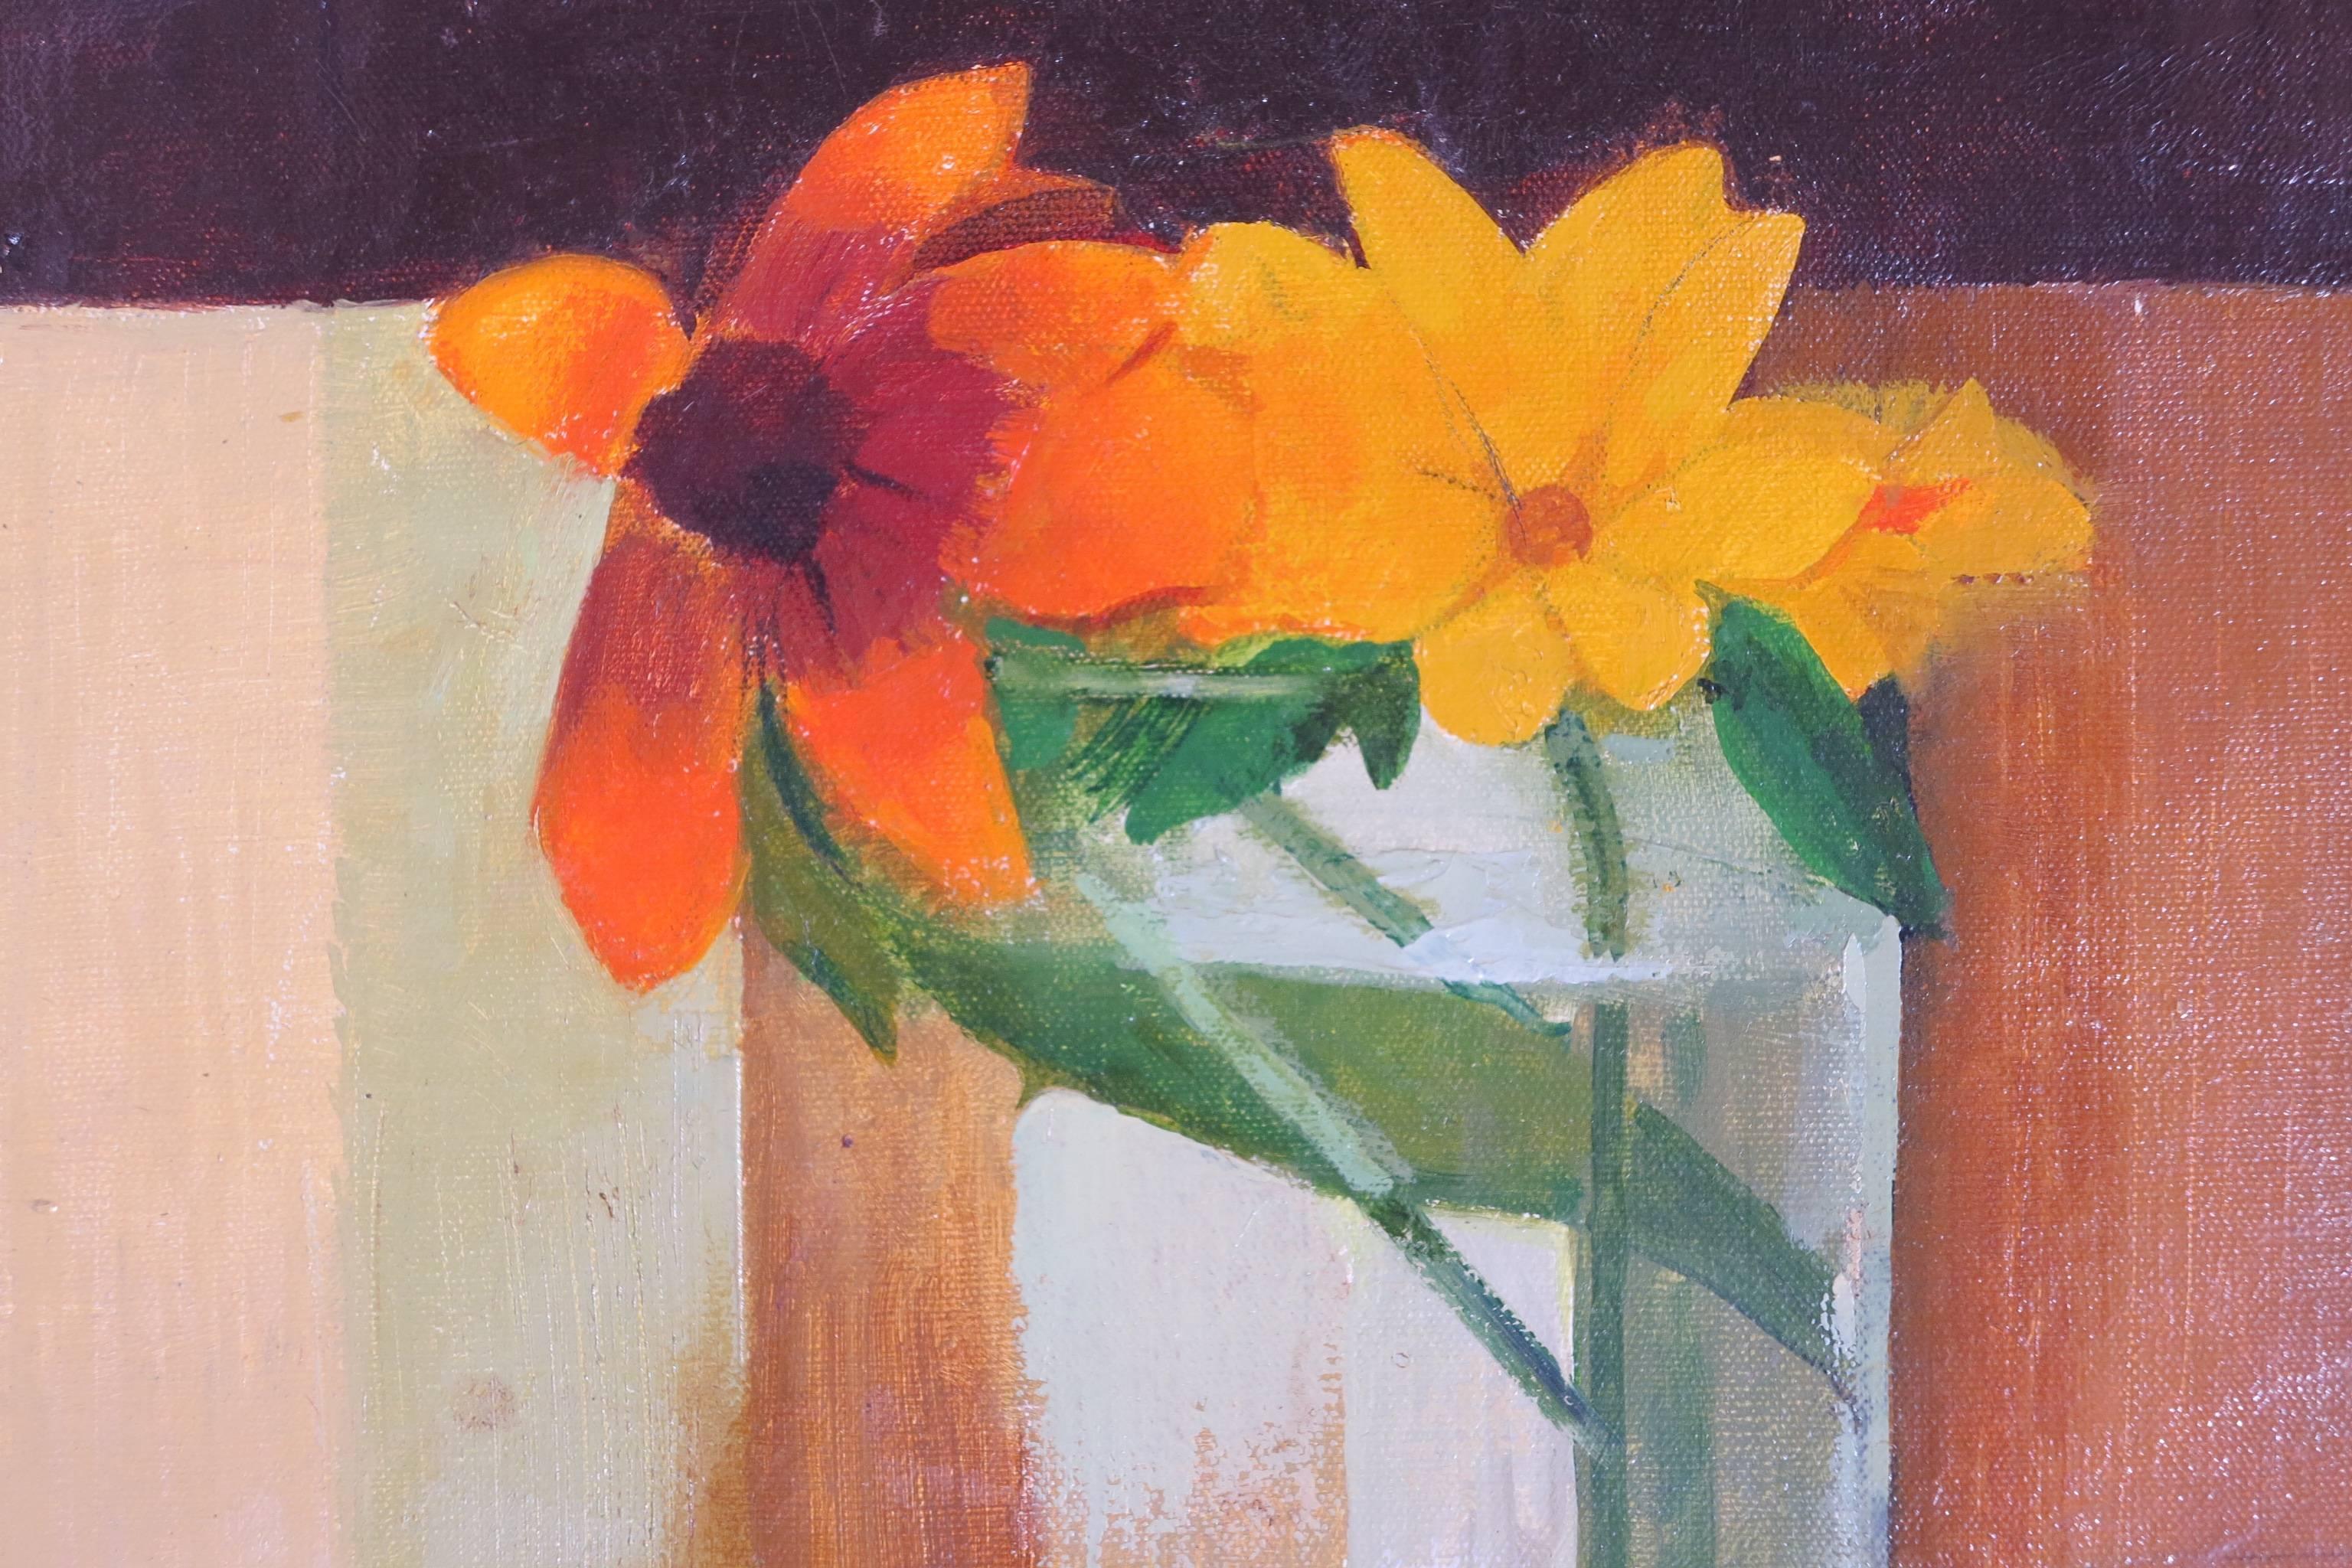 Gloriosa Daisies (modernist floral still life painting) - Painting by Charles Coiner